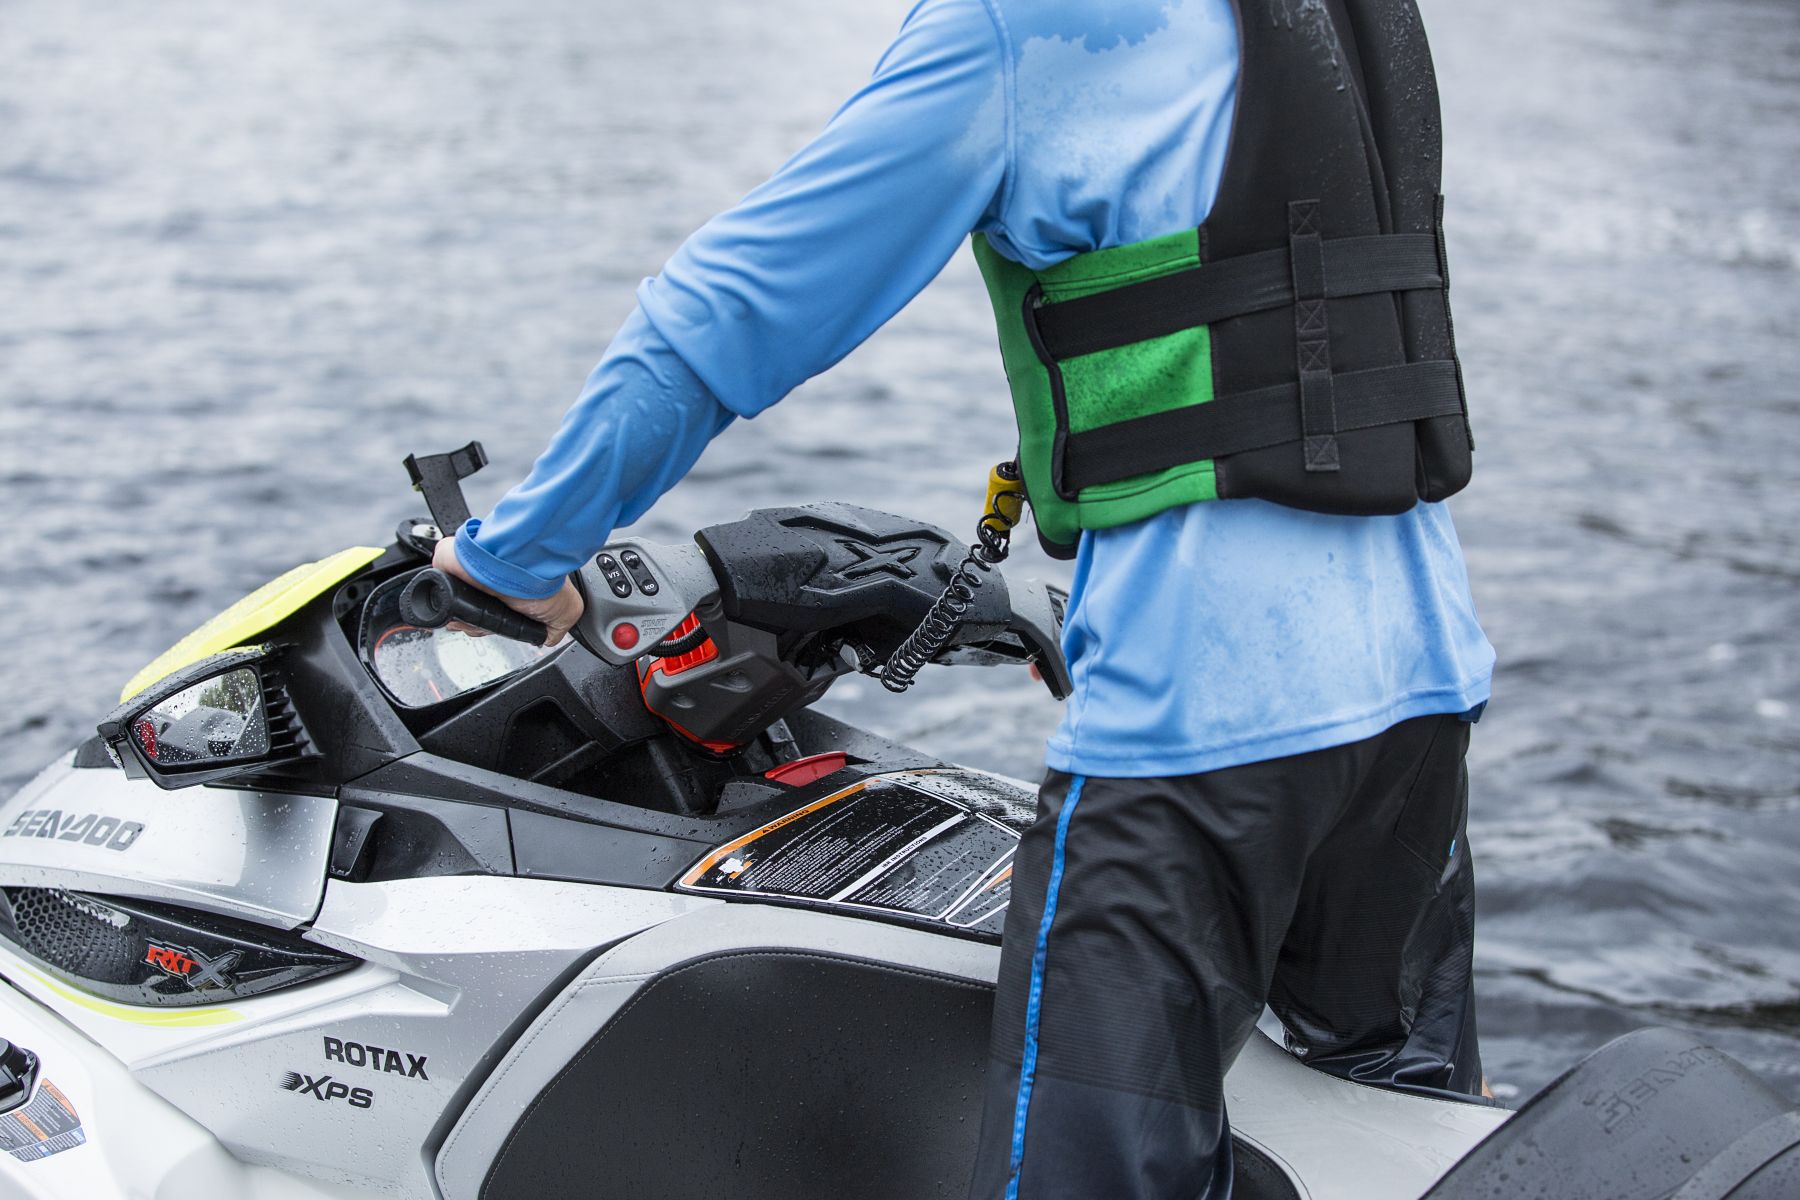 Using a safety lanyard kill switch on a personal watercraft while wearing a properly fitting life jacket.